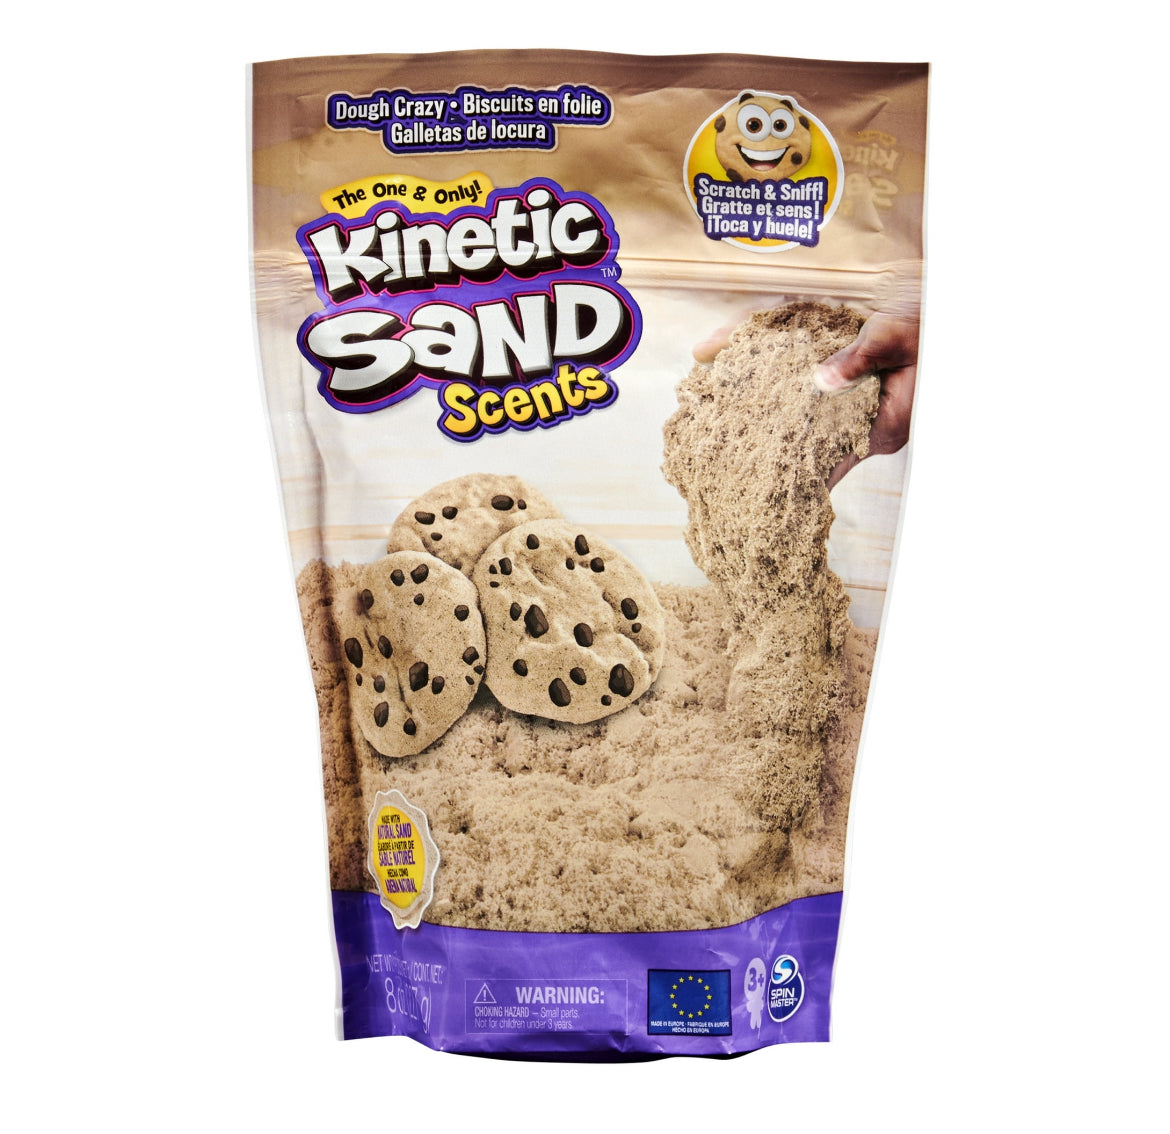 Kinetic Sand Scents, 8oz Light Brown Dough Crazy Scented Kinetic Sand